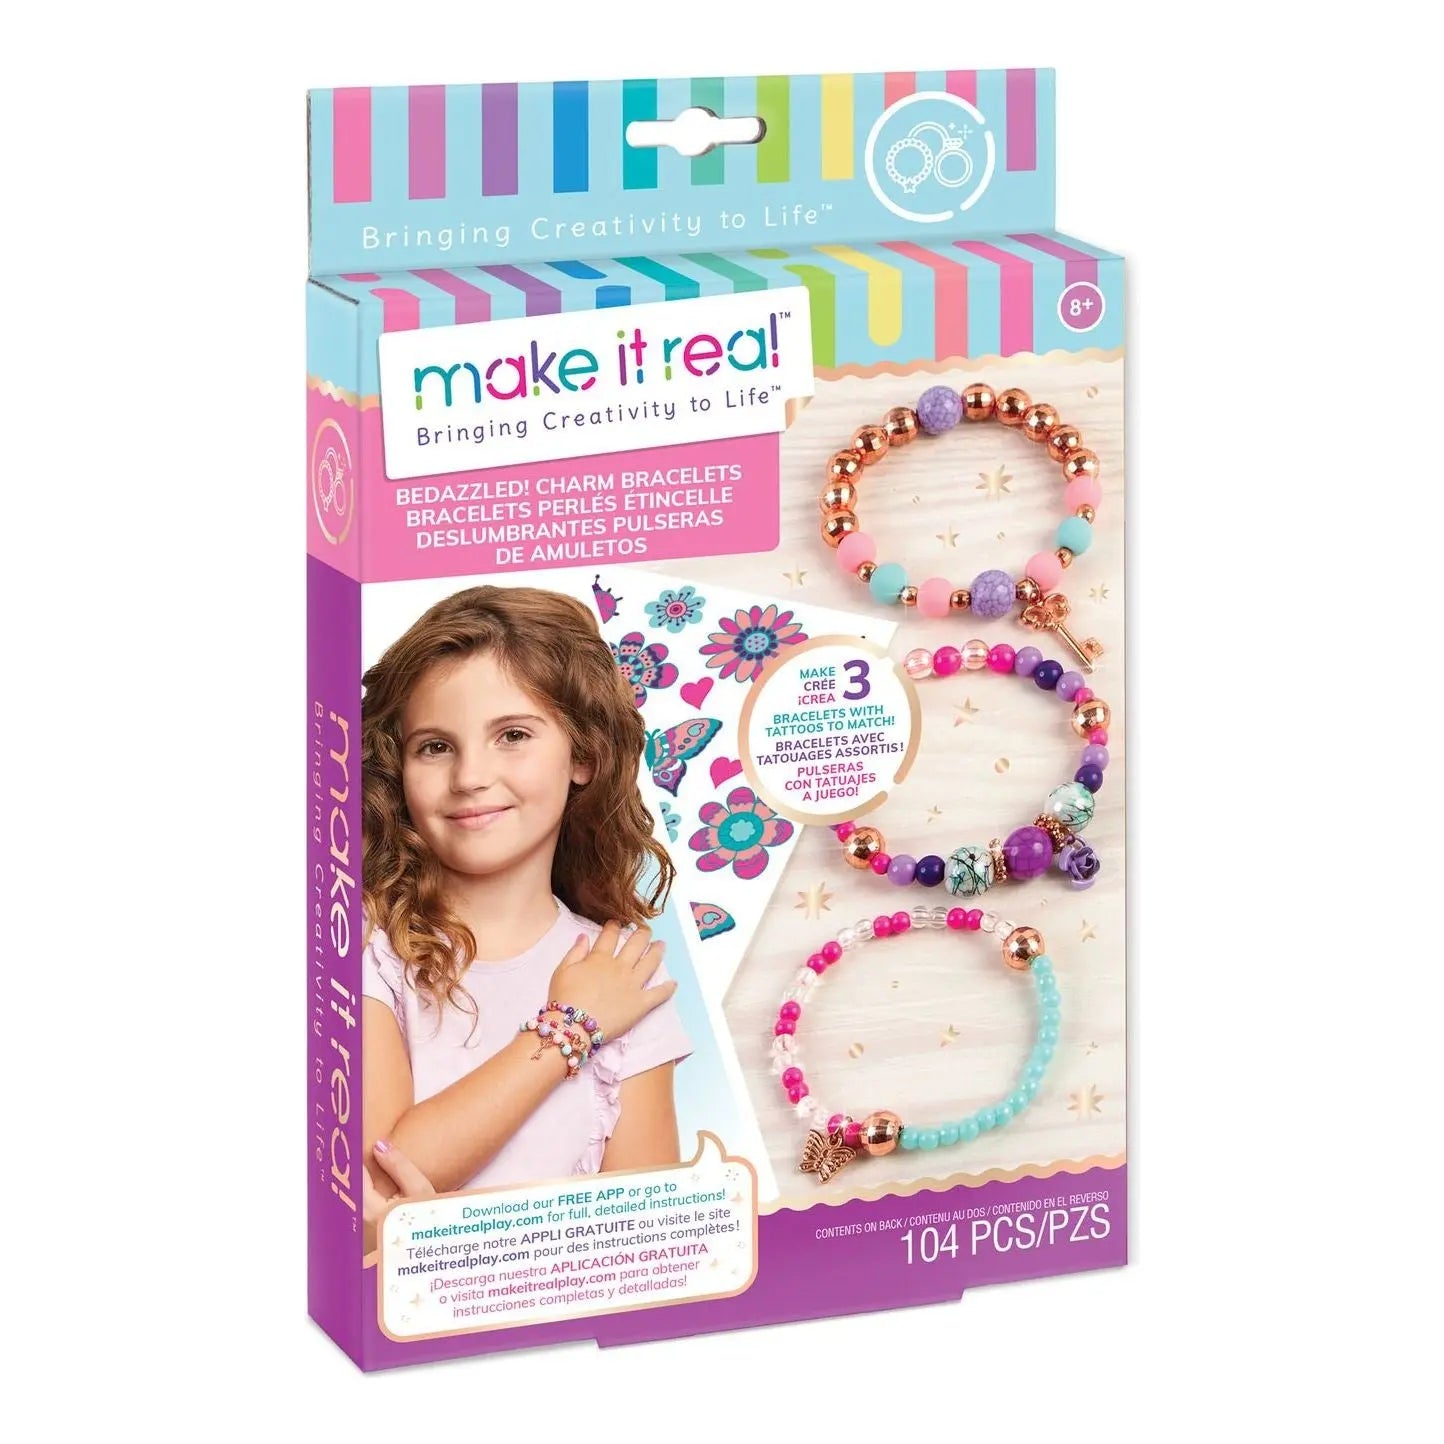 Make It Real Bedazzled! Charm Bracelets Blooming Creativity Make It Real